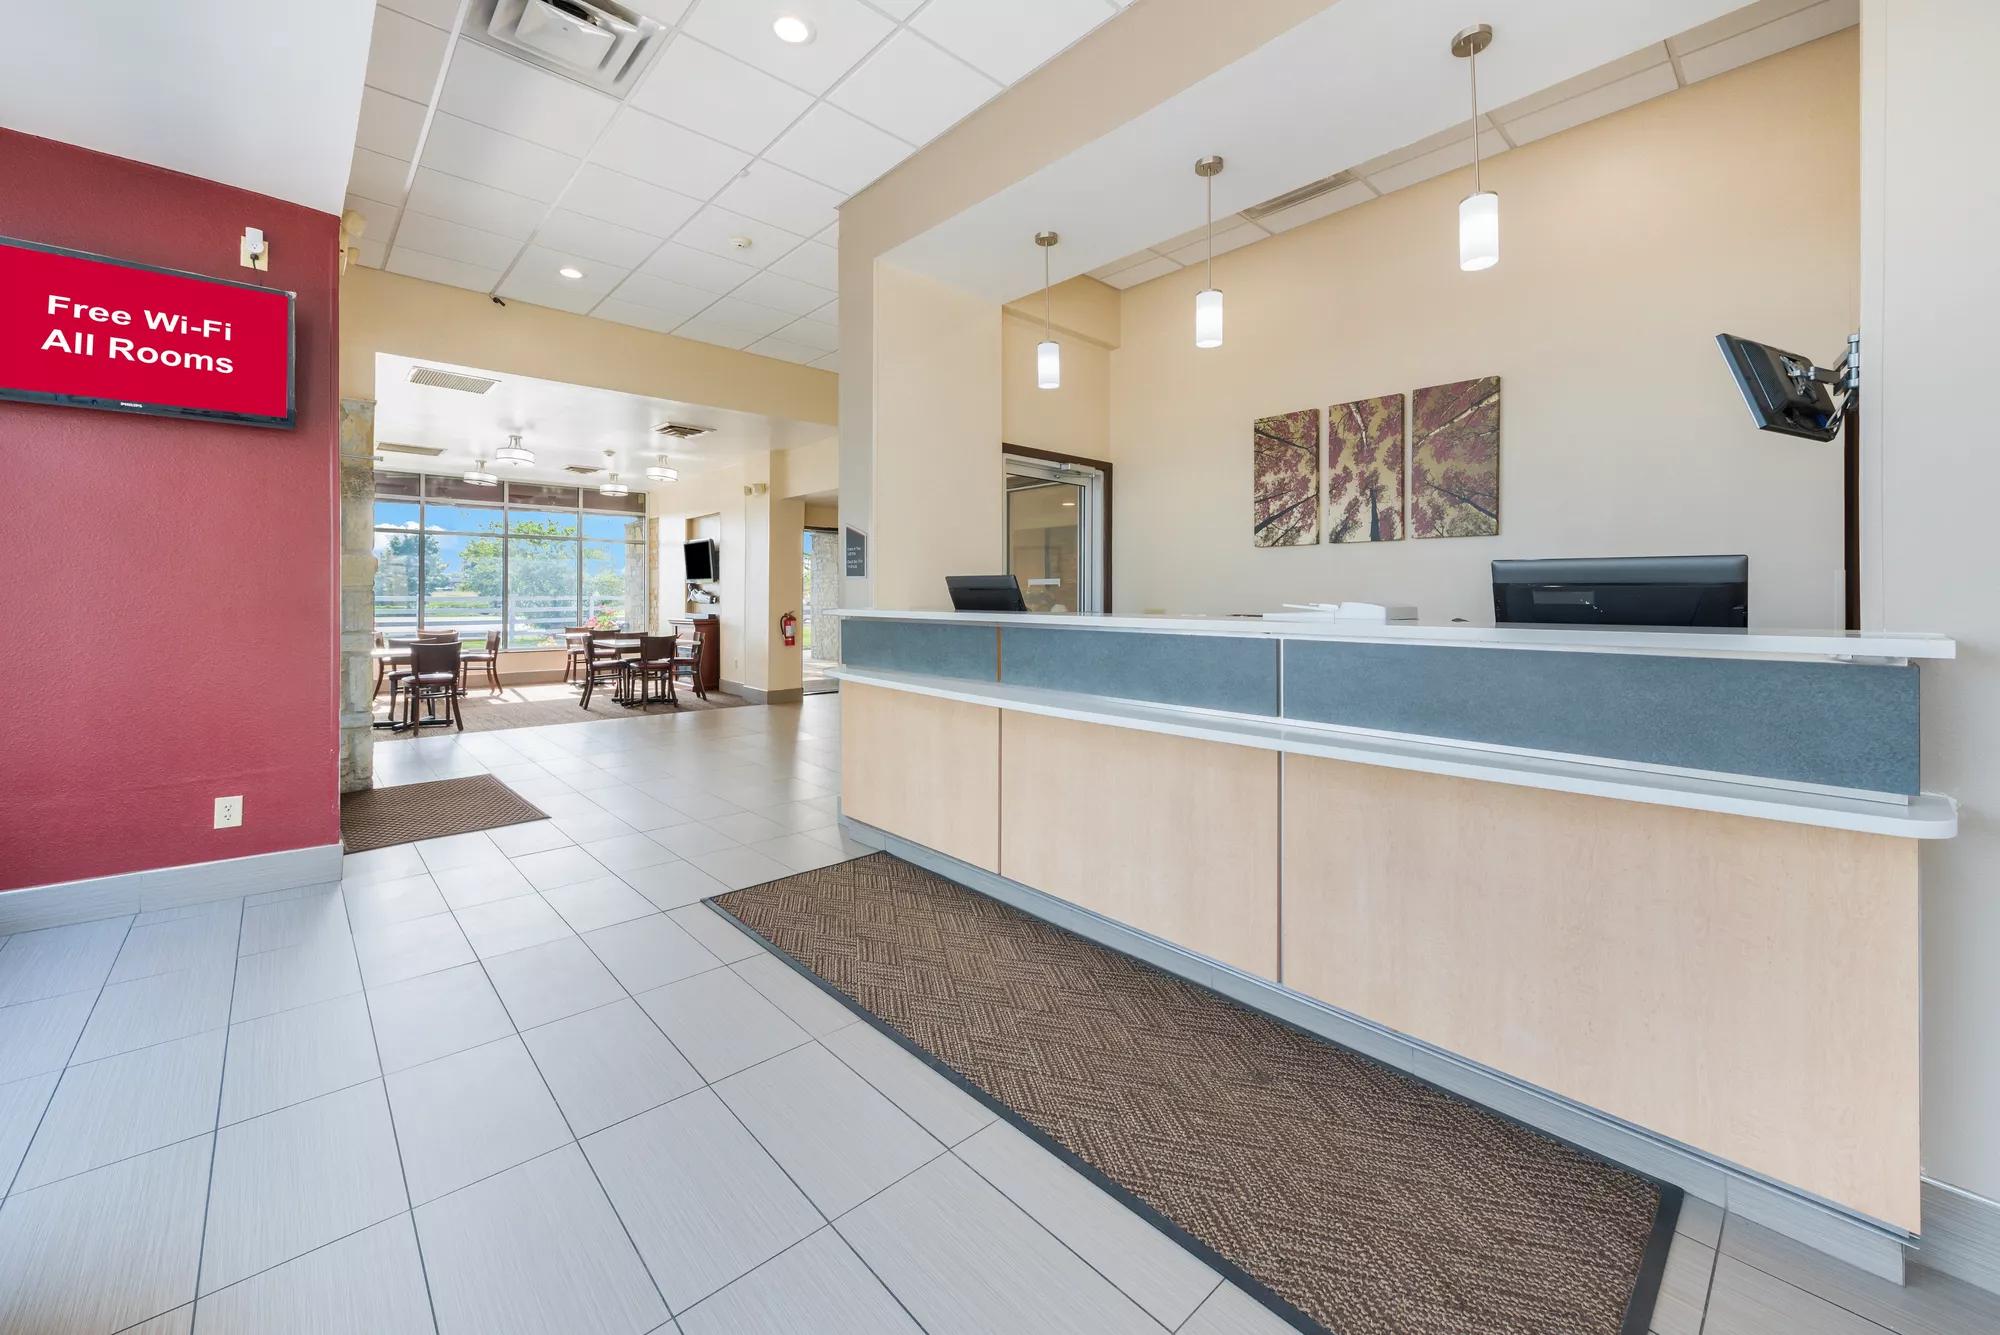 Red Roof Inn Columbus - Grove City Front Desk and Lobby Image